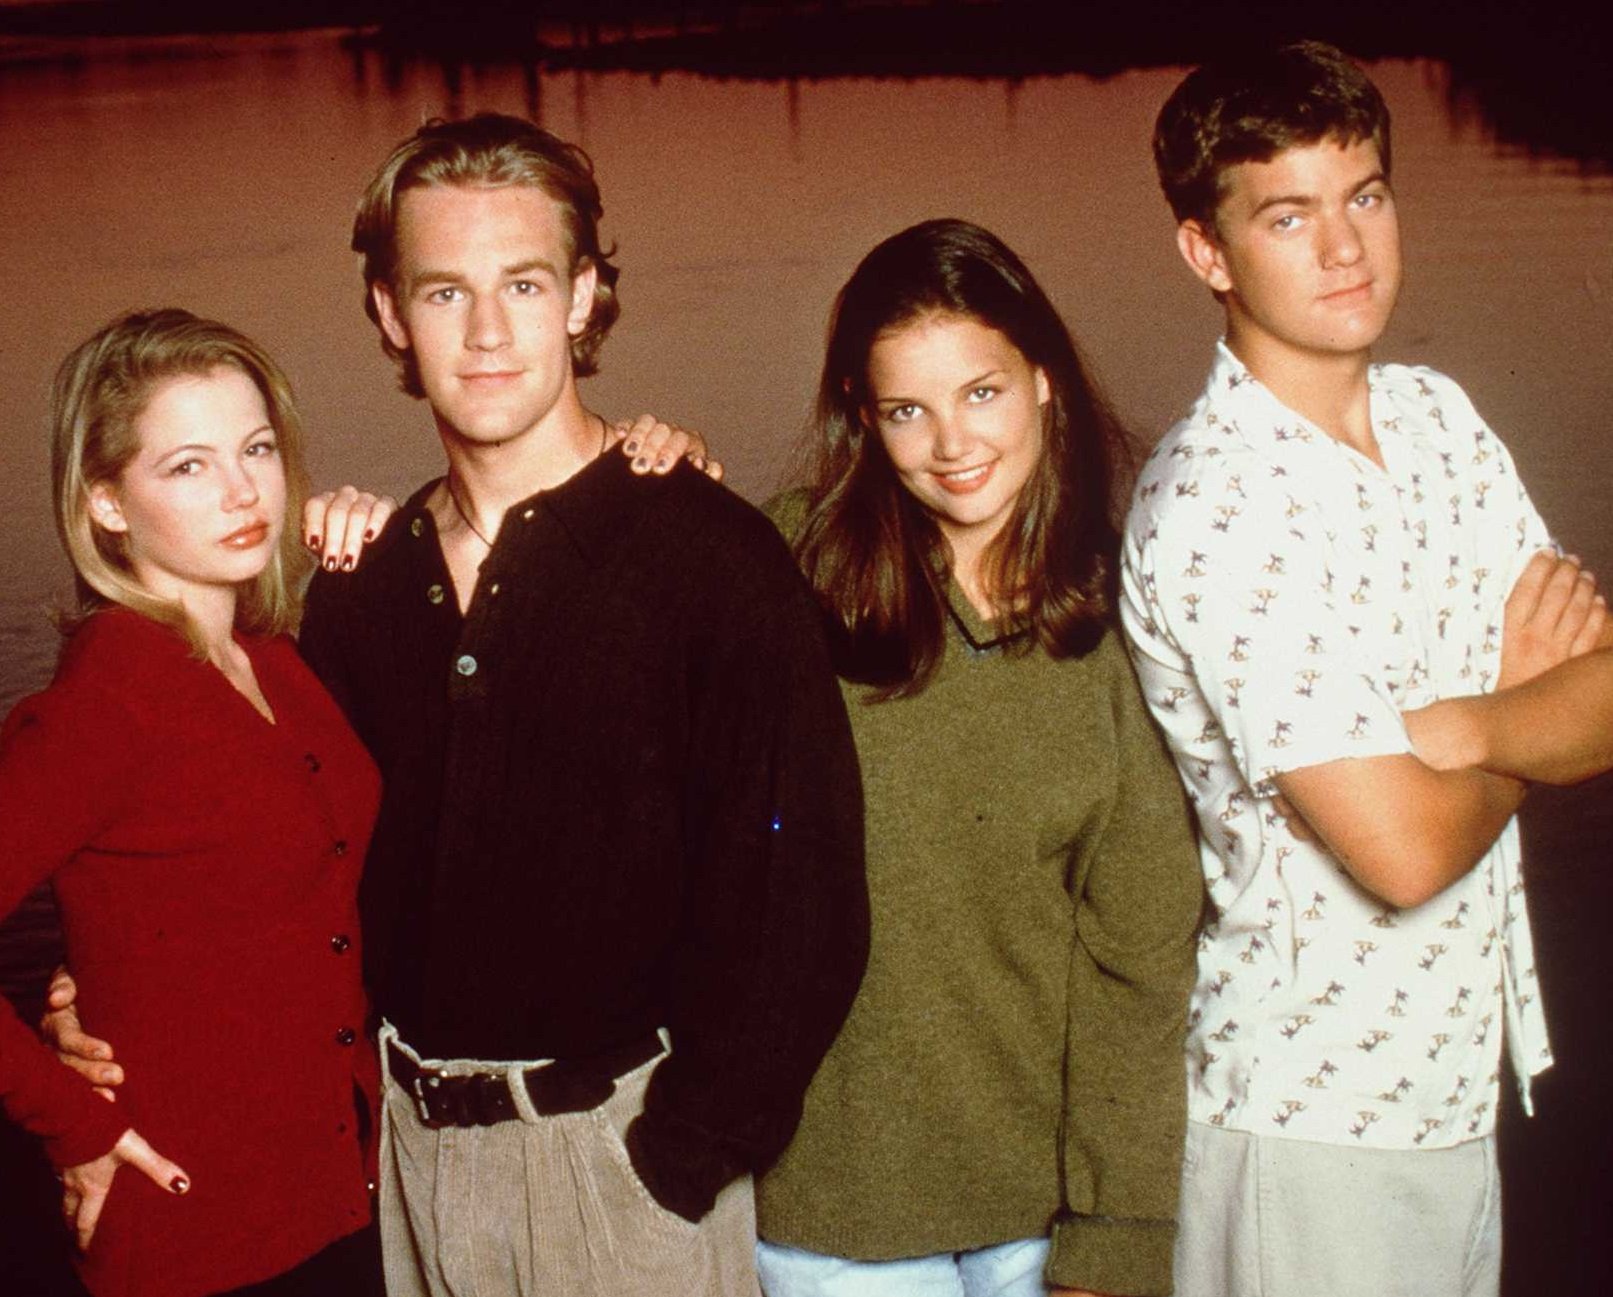 Dawsons Creek Which Of The Main Cast Members Was The Youngest In